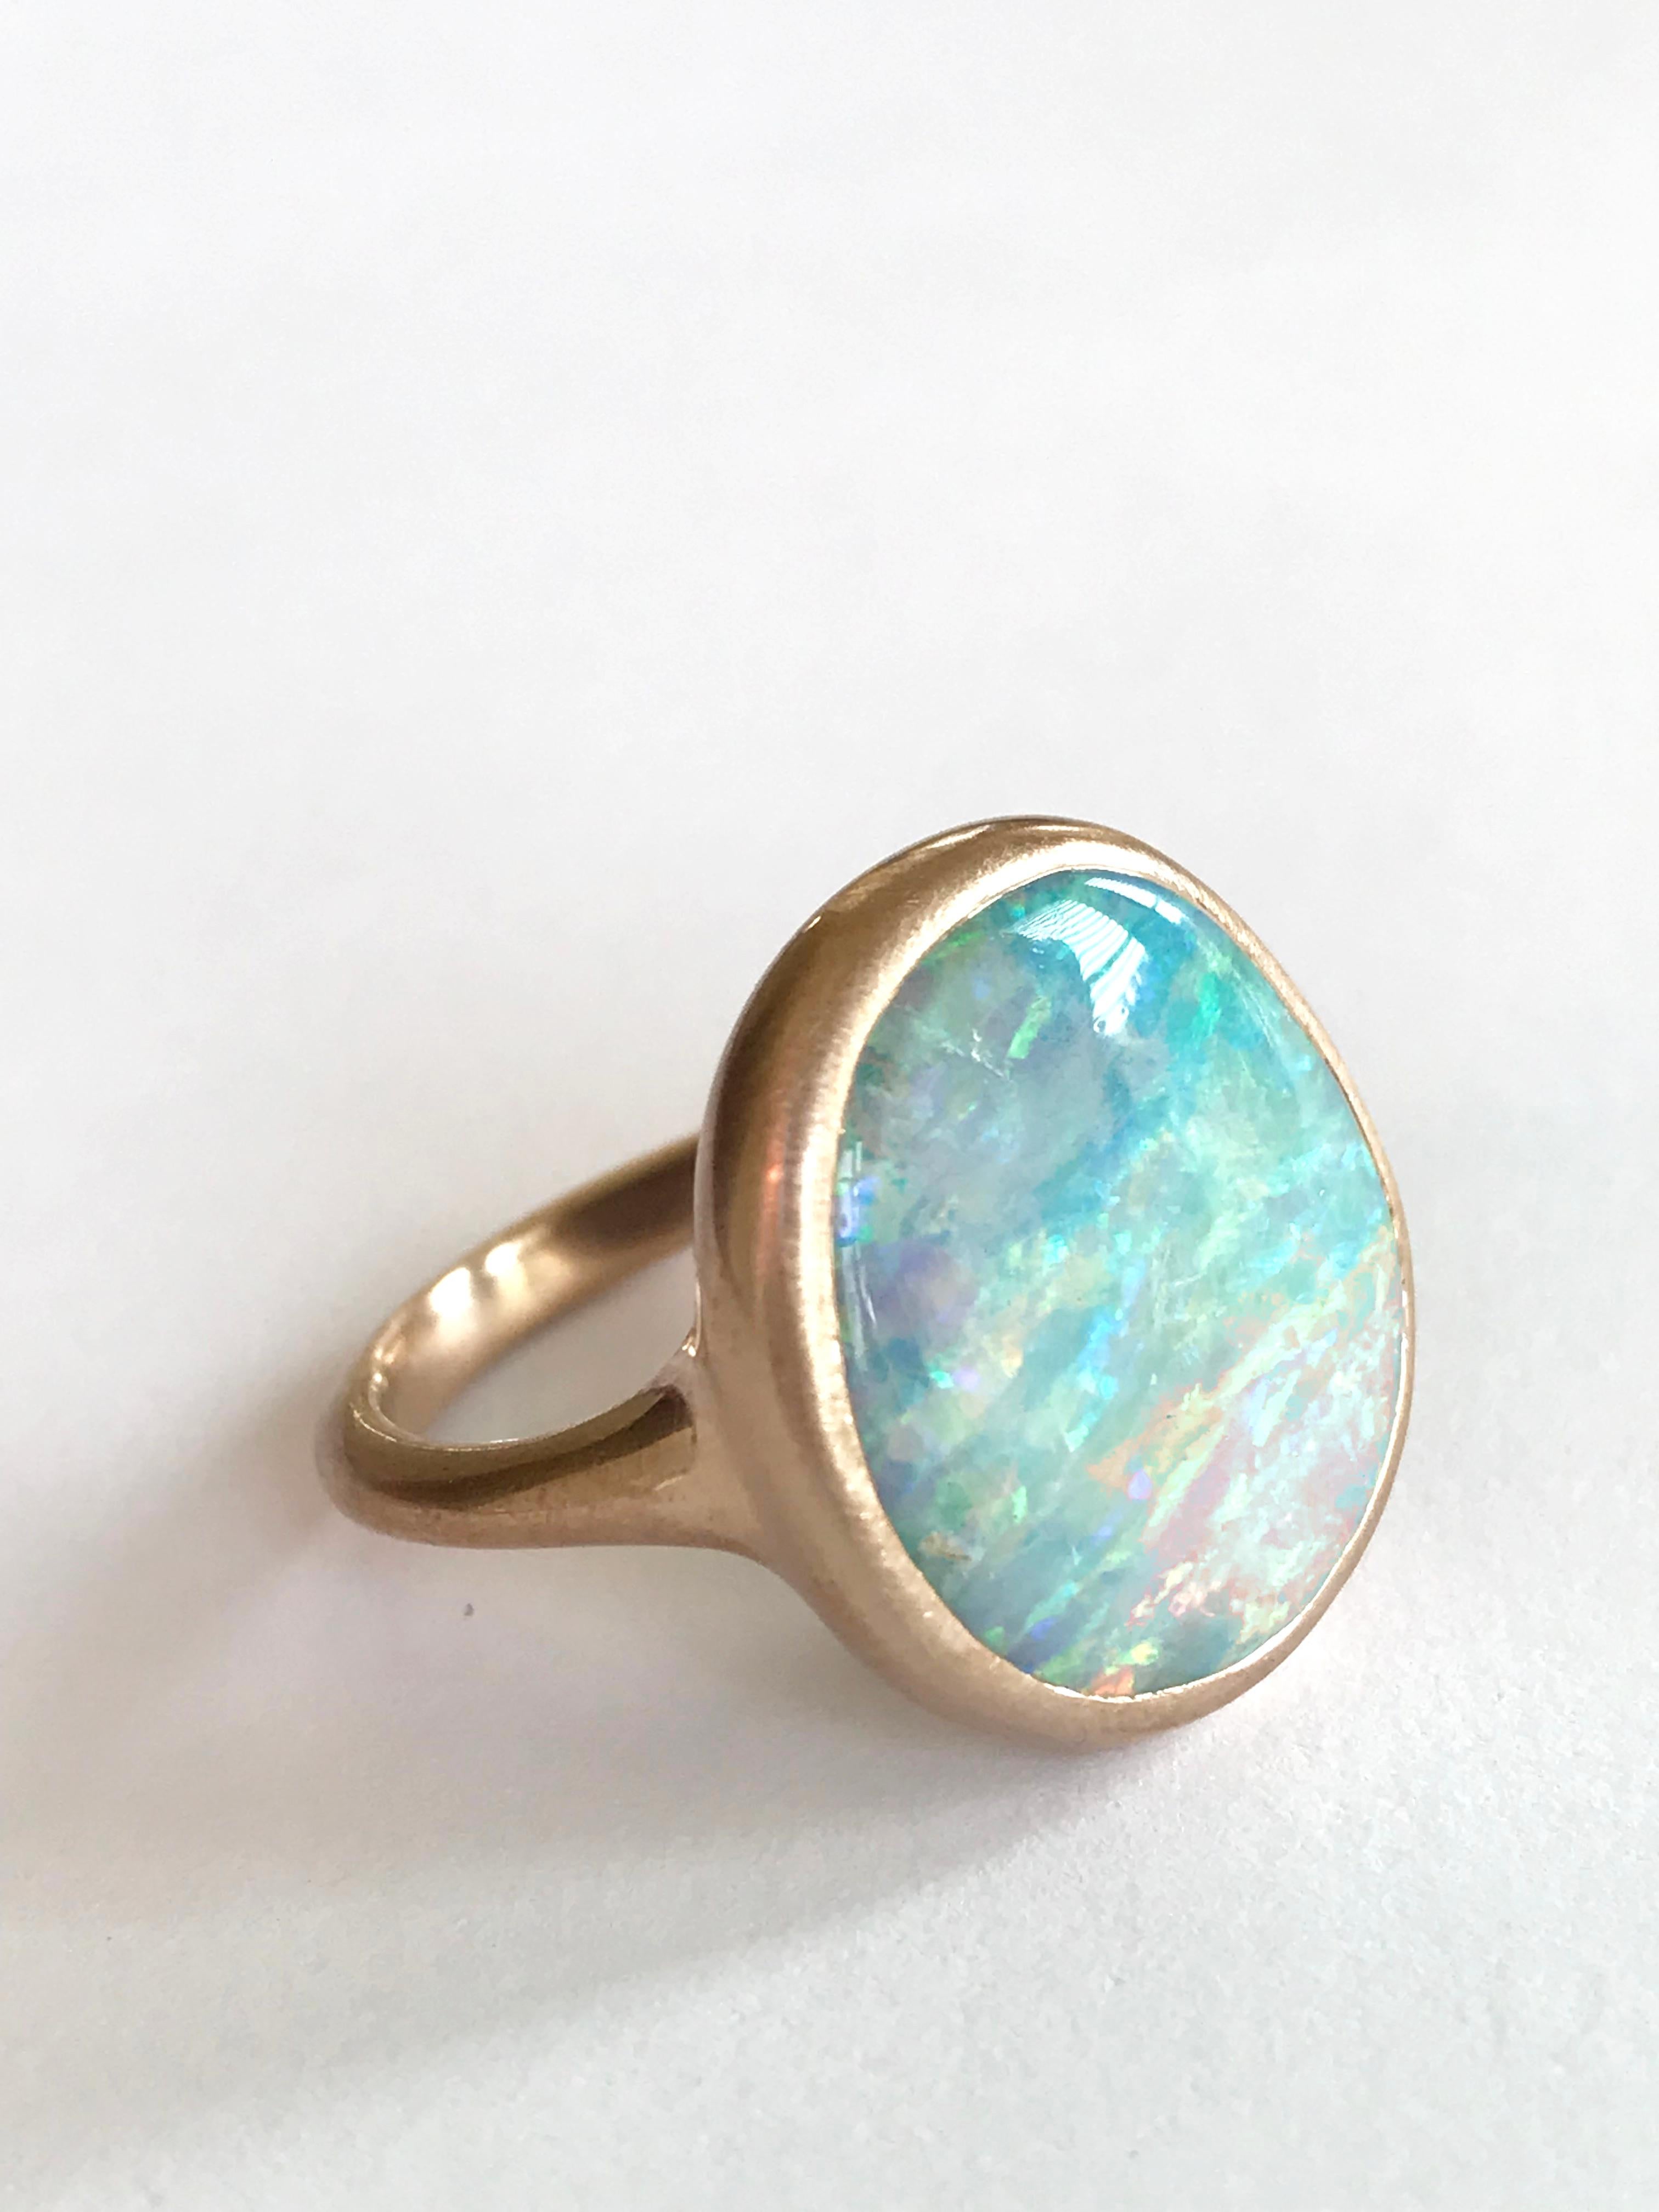 Dalben design One of a kind 18 kt rose gold matte finishing ring with a 9,8 carat bezel-set wonderful Australian Boulder Opal .  
The stone has pastel colors with blue , green , pink and yellow light spots.
Ring size 6 3/4 - EU 54 re-sizable to most